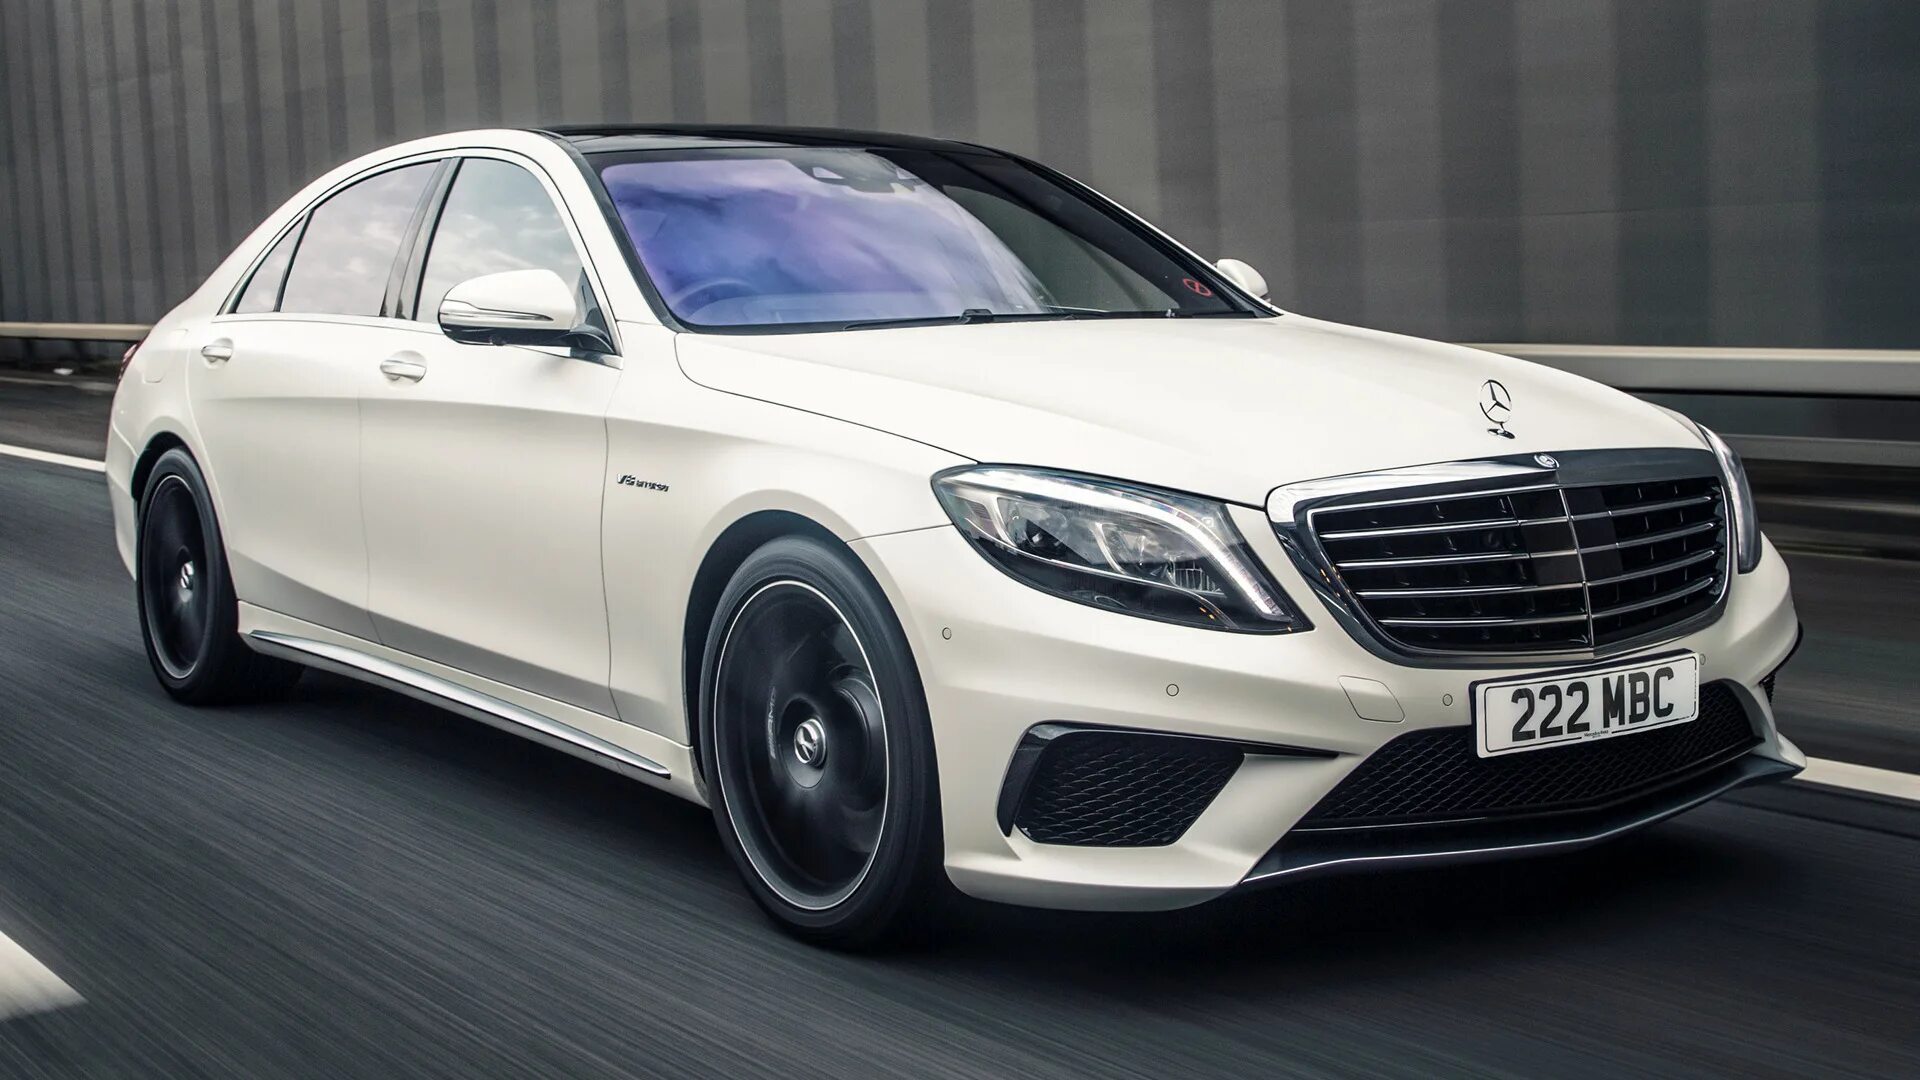 Мерседес s class 63 AMG. Mercedes Benz s63 AMG w222. Мерседес s222 63 AMG. Mercedes Benz s500 w222.